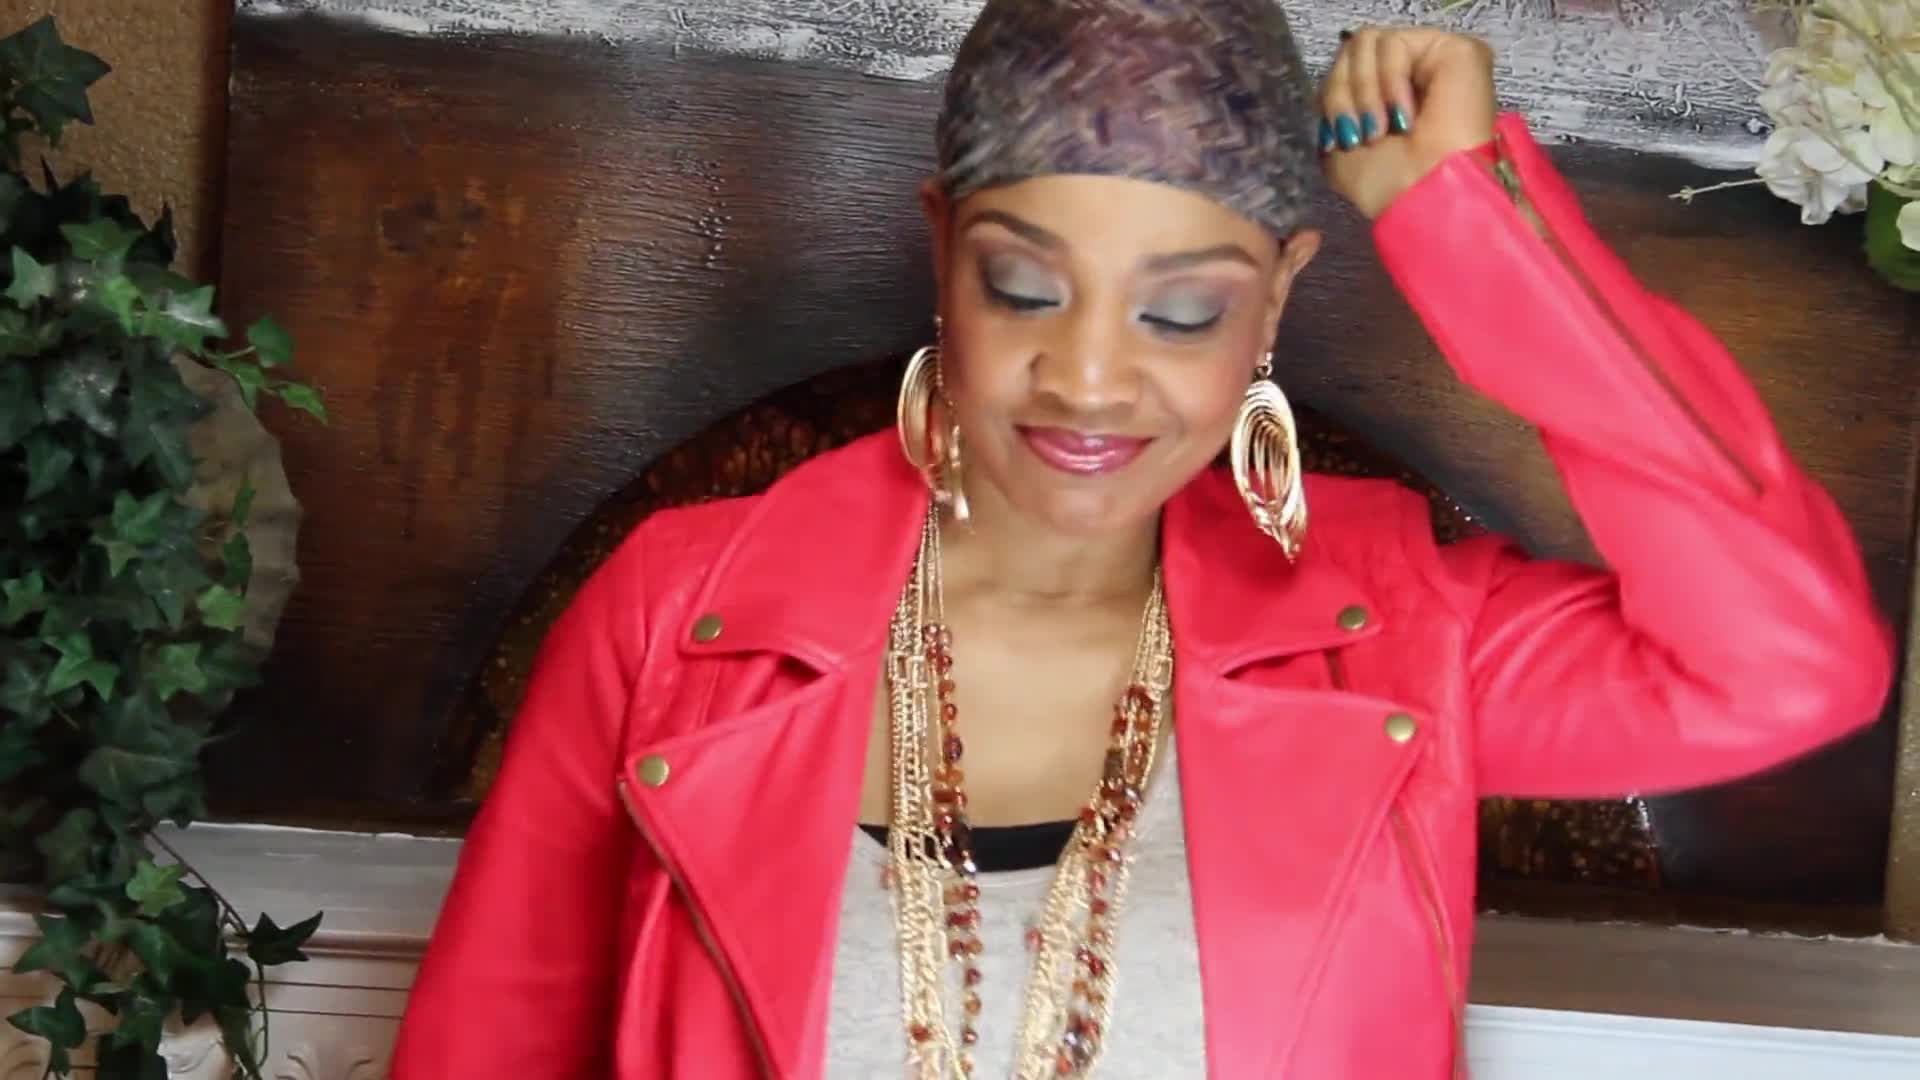 "Smooth Step" - Ms. Irene Renee (OFFICIAL Music Video)